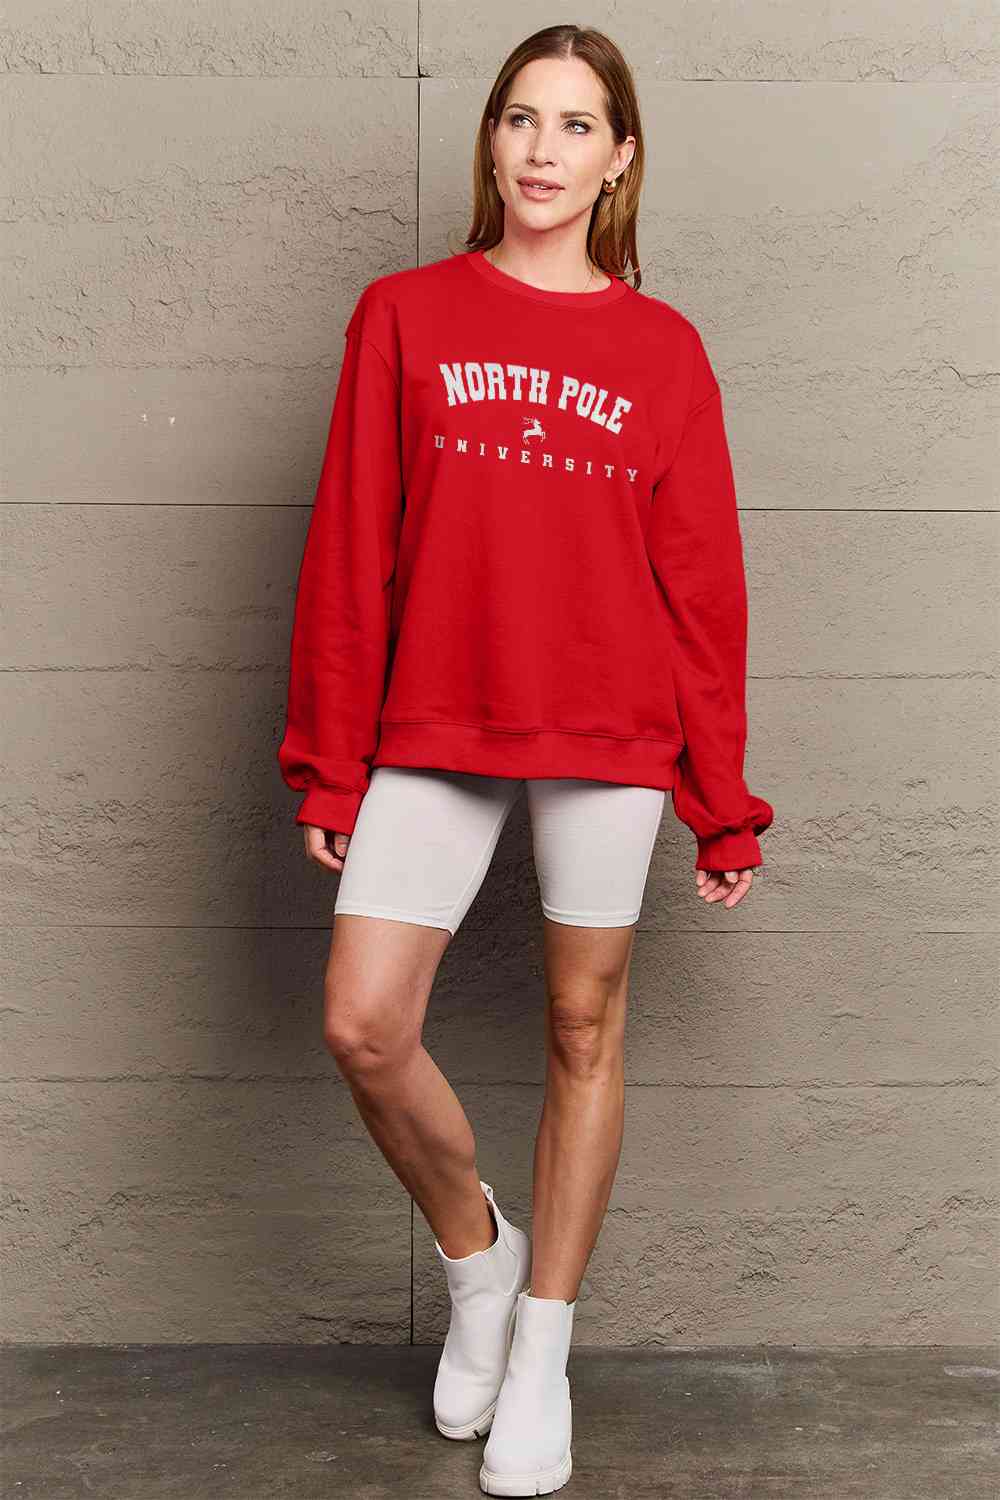 Rosy Brown Simply Love Full Size NORTH POLE UNIVERSITY Graphic Sweatshirt Sentient Beauty Fashions Apparel &amp; Accessories